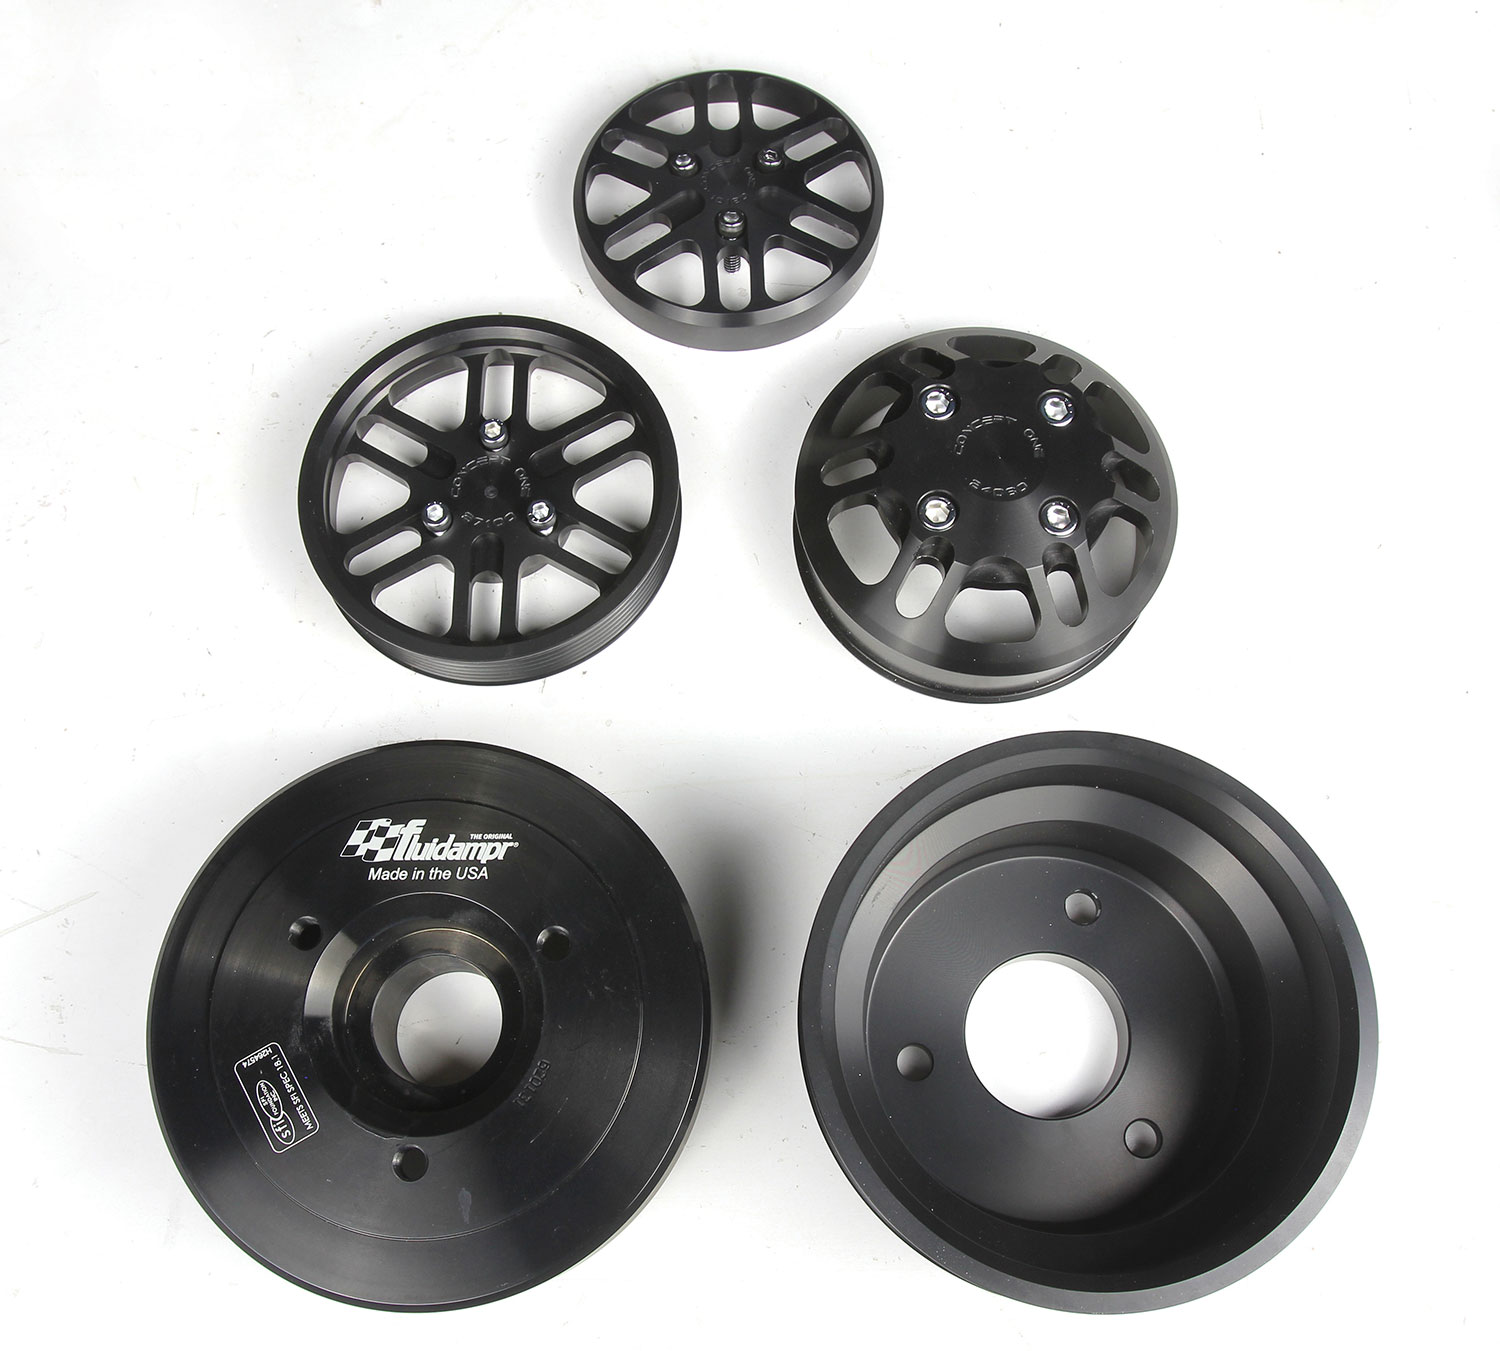 Concept One’s LS Victory Series Kit parts in anodized black sit on a work surface